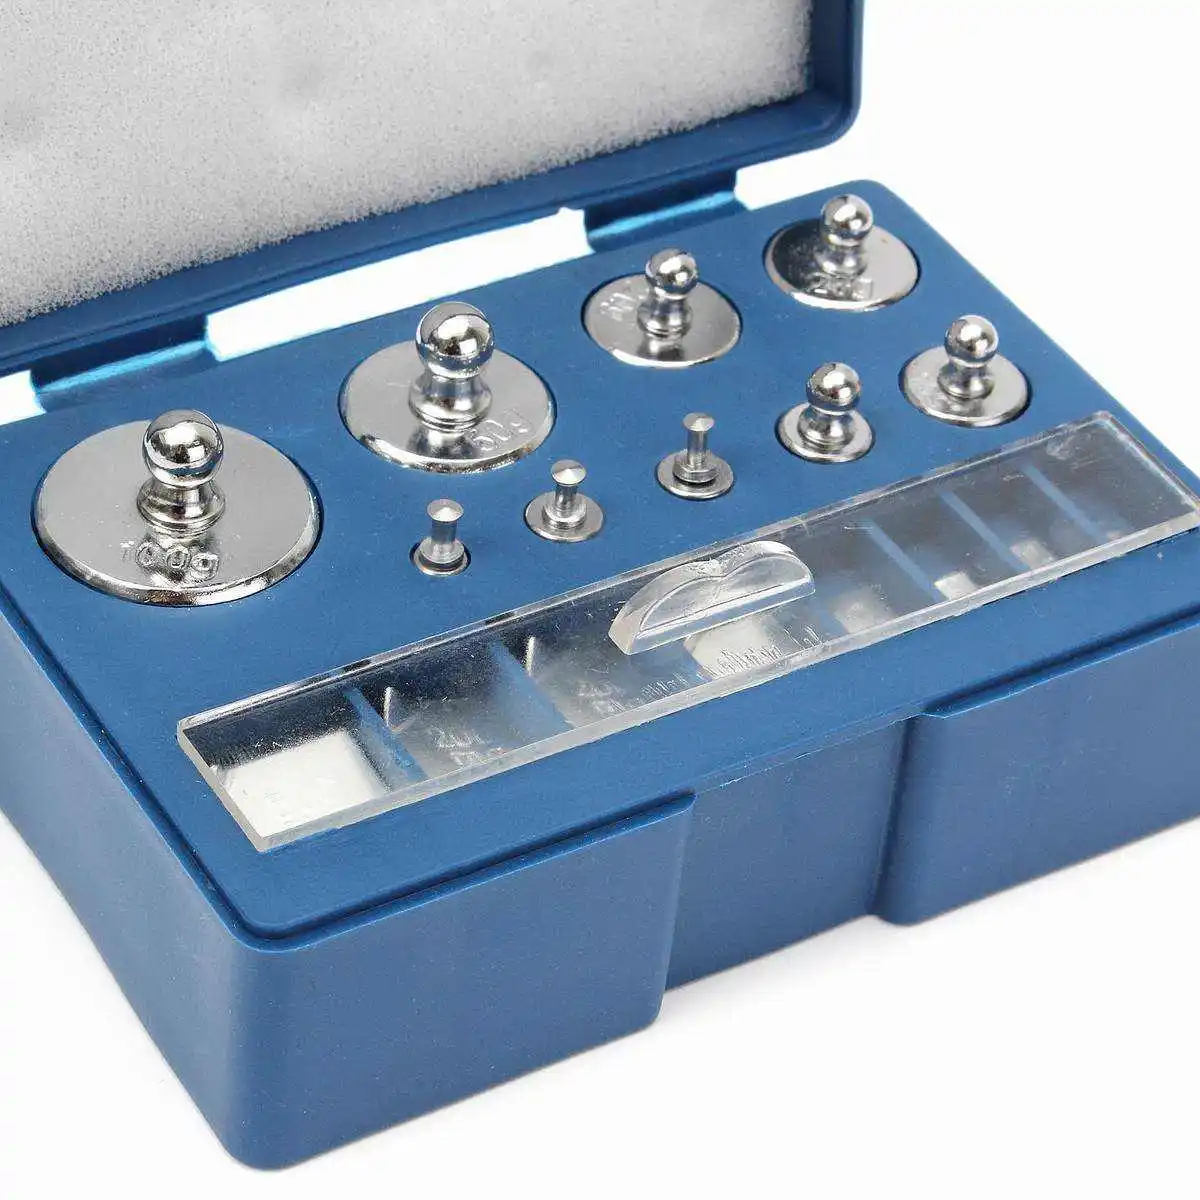 17Pcs 211.1g 10mg-100g Grams Precision Steel Calibration Weight Kit Set with Tweezers for Balance Scale 